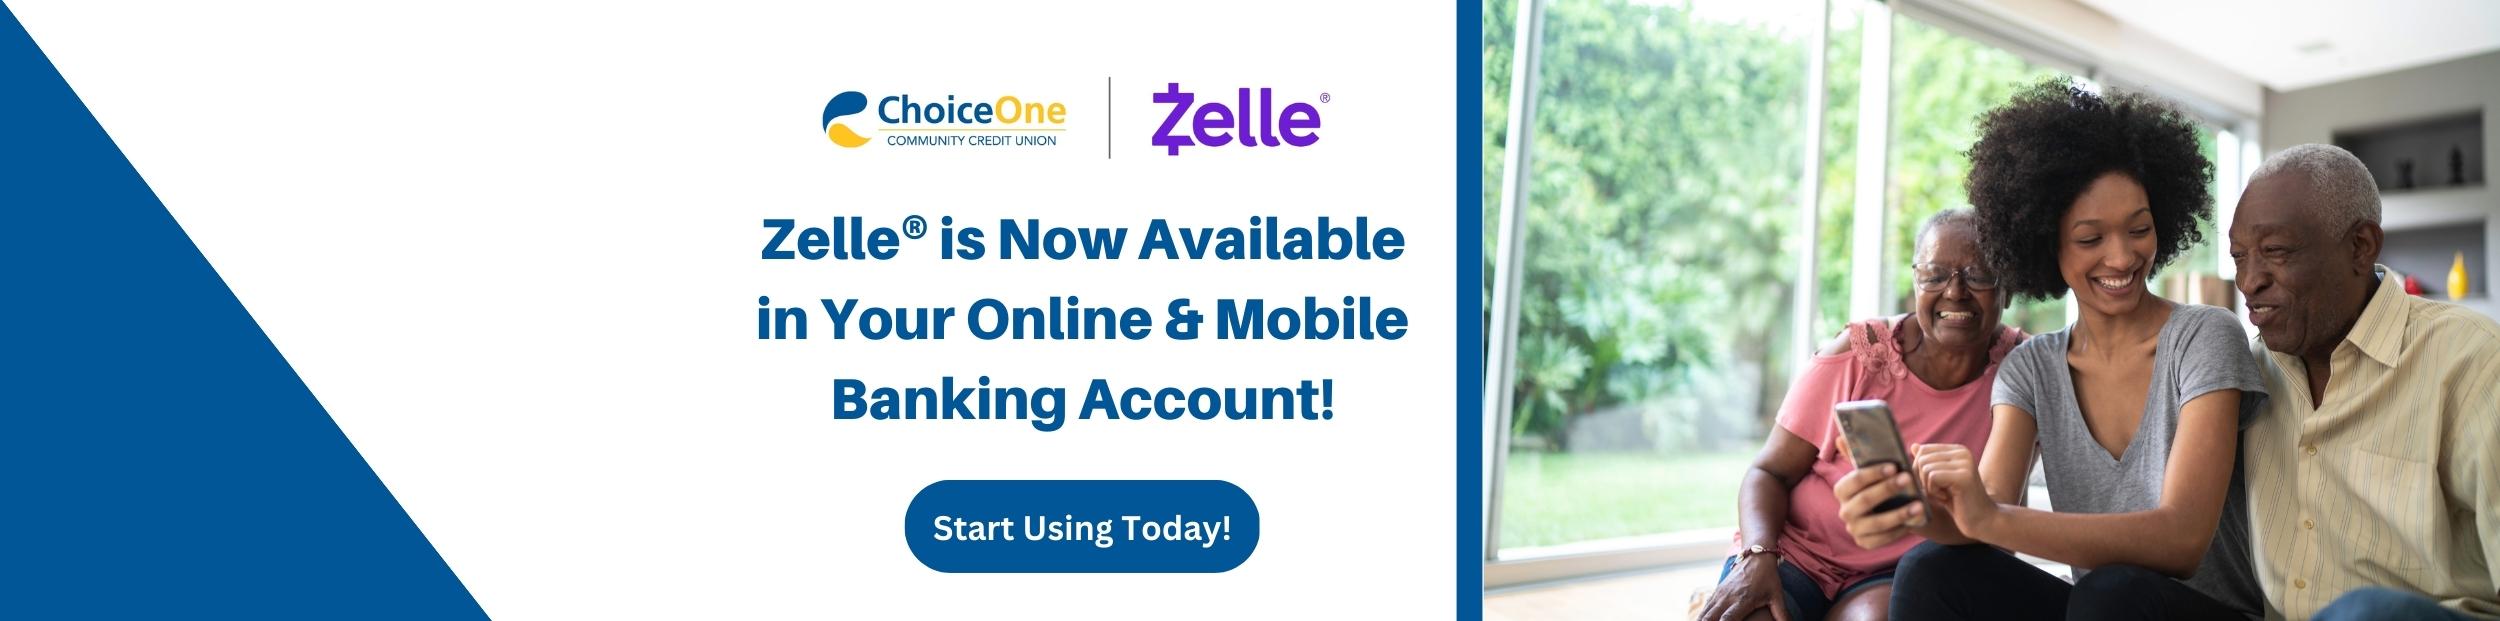 Family looking at a cell phone together performing a Zelle transaction.